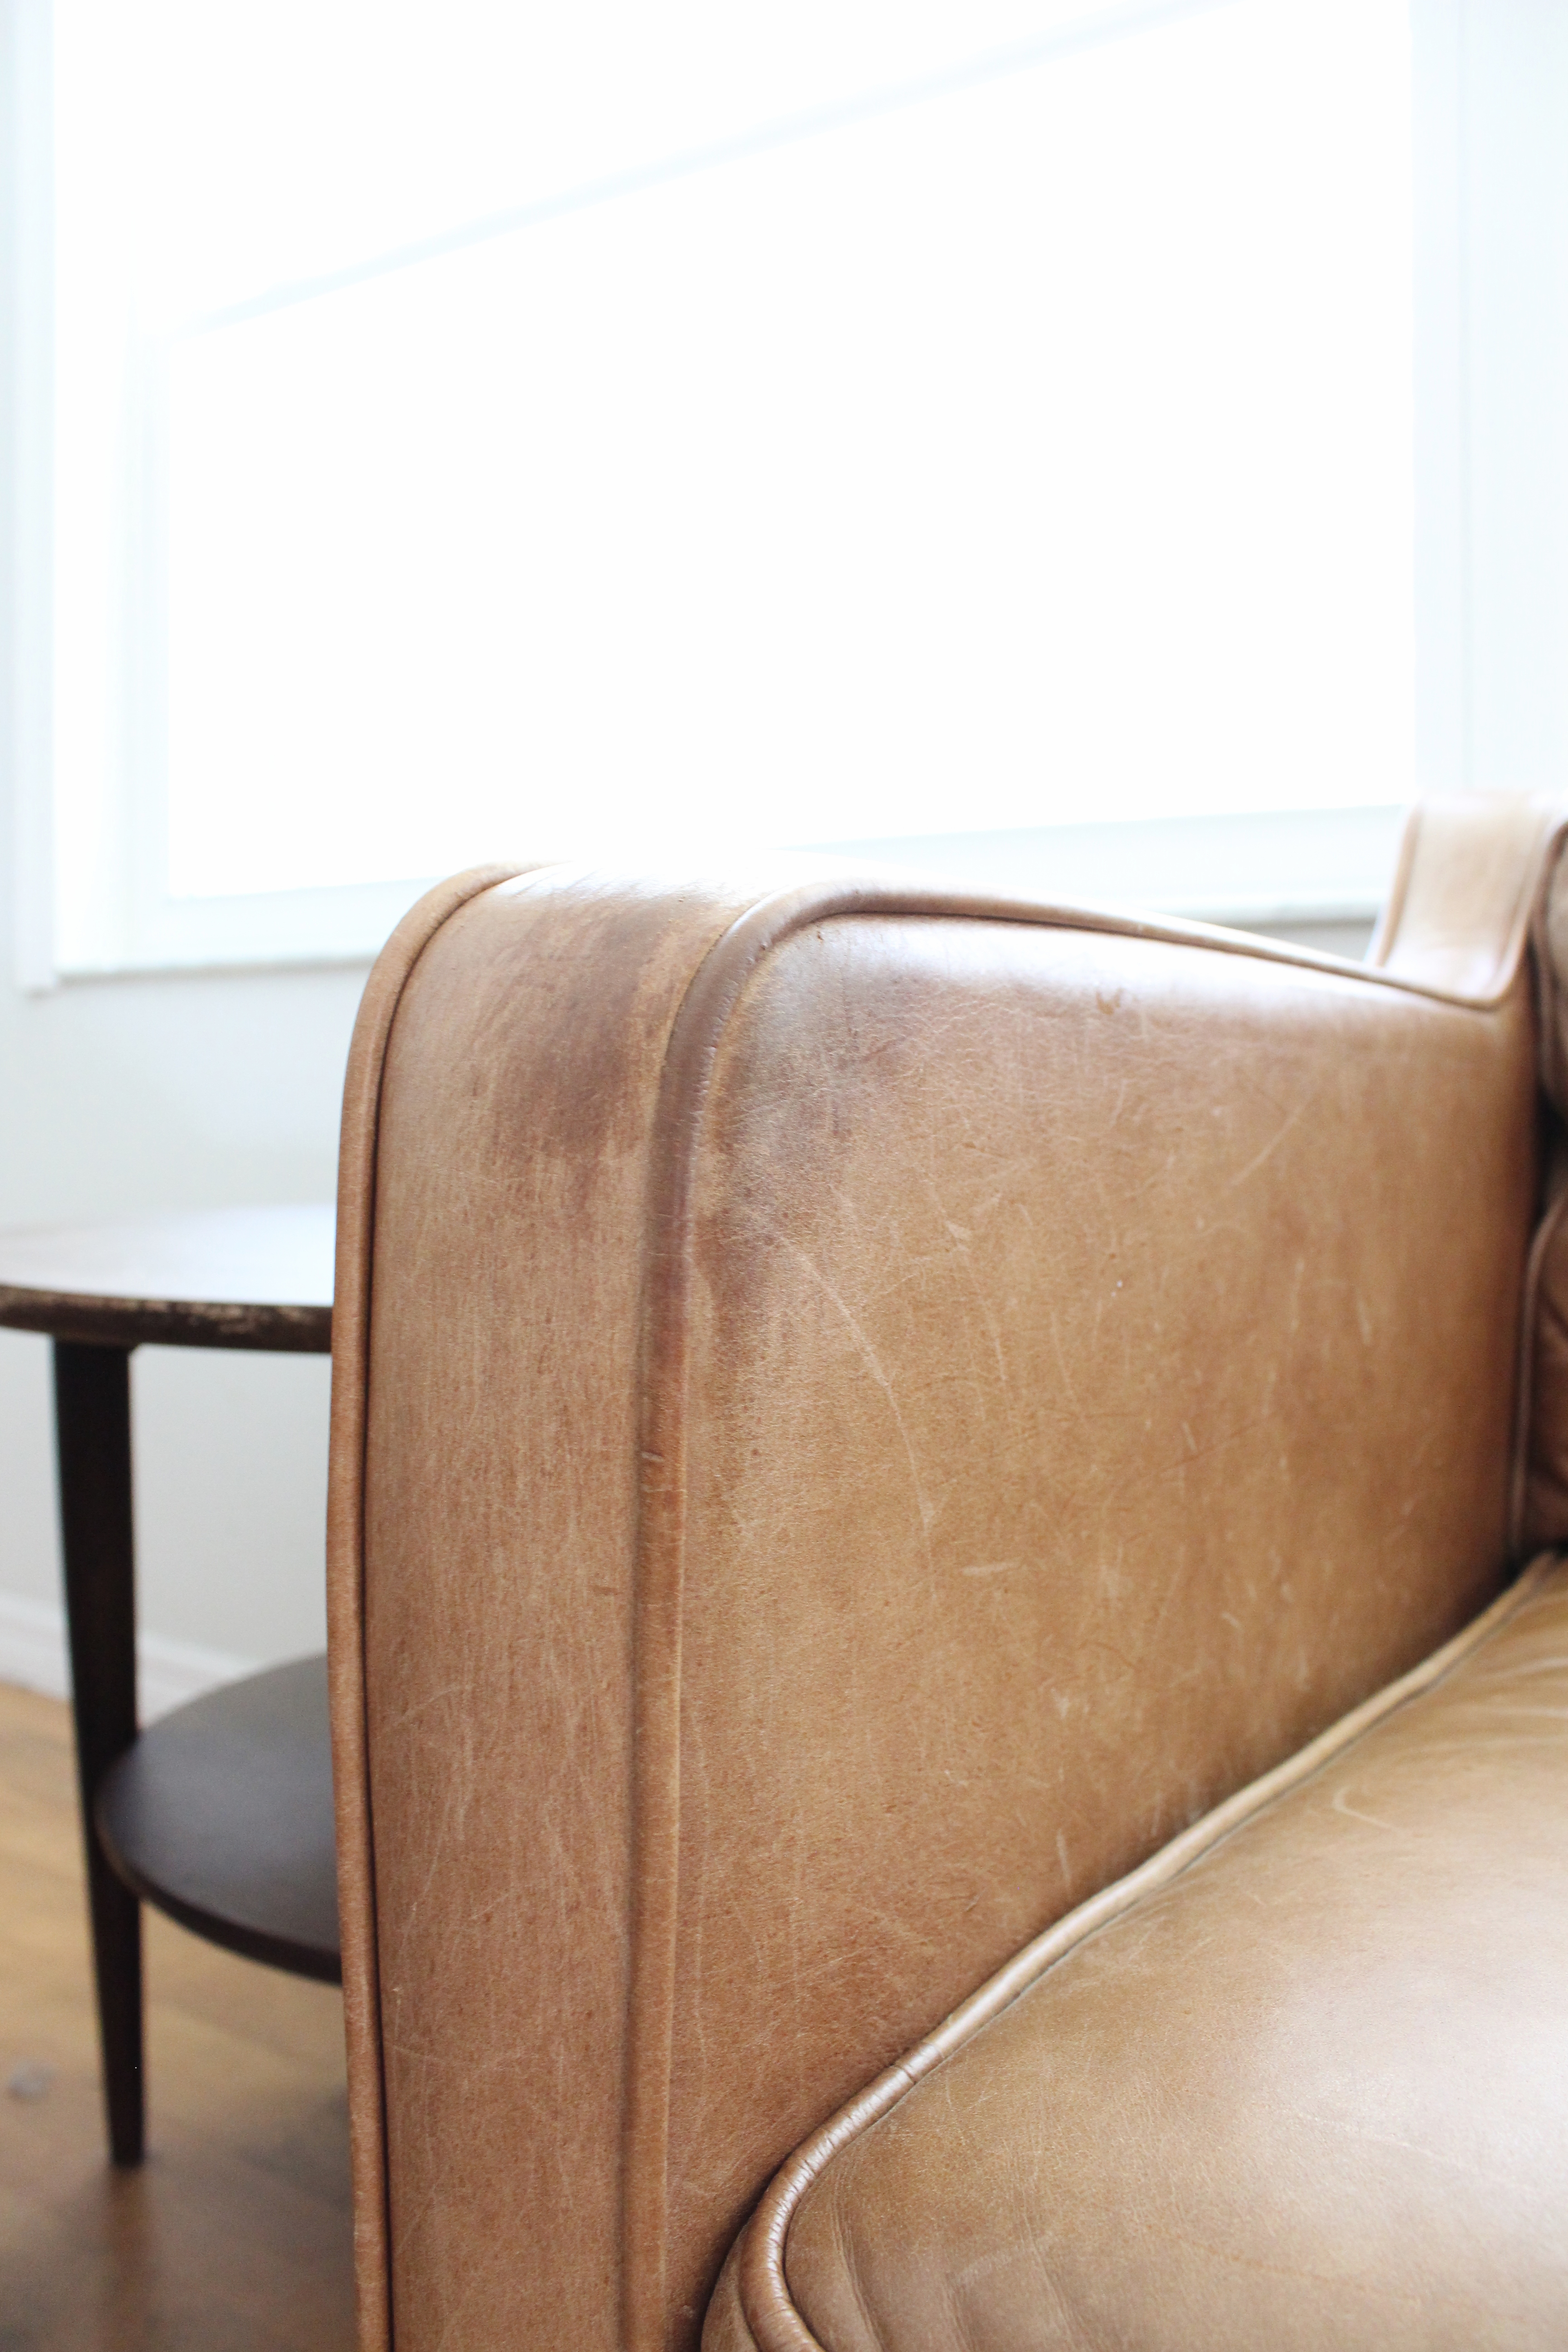 how to remove cat scratches west elm sofa